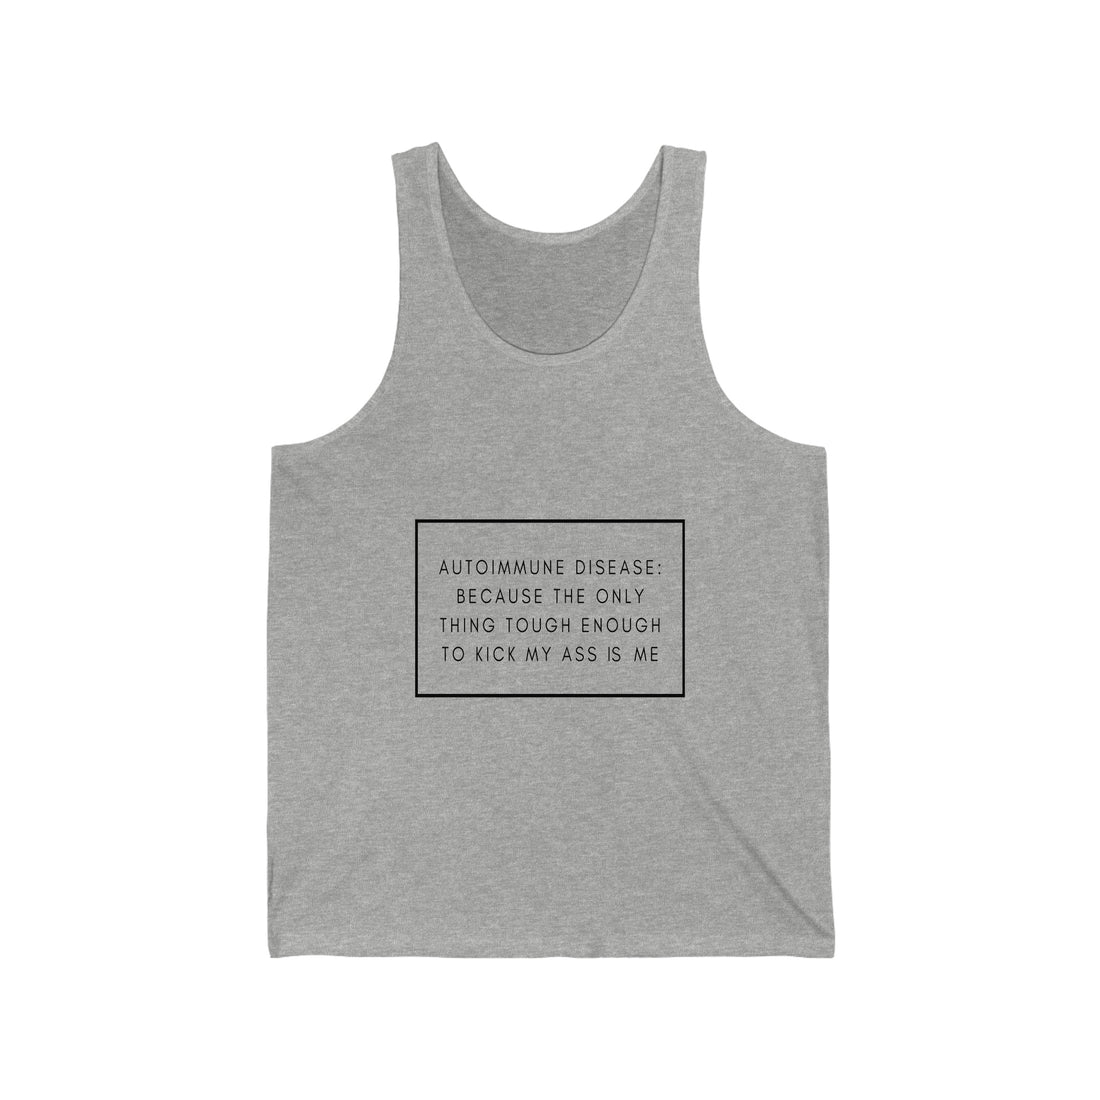 Autoimmune Disease Because The Only Thing Tough Enough To Kick My Ass Is Me - Unisex Jersey Tank Top